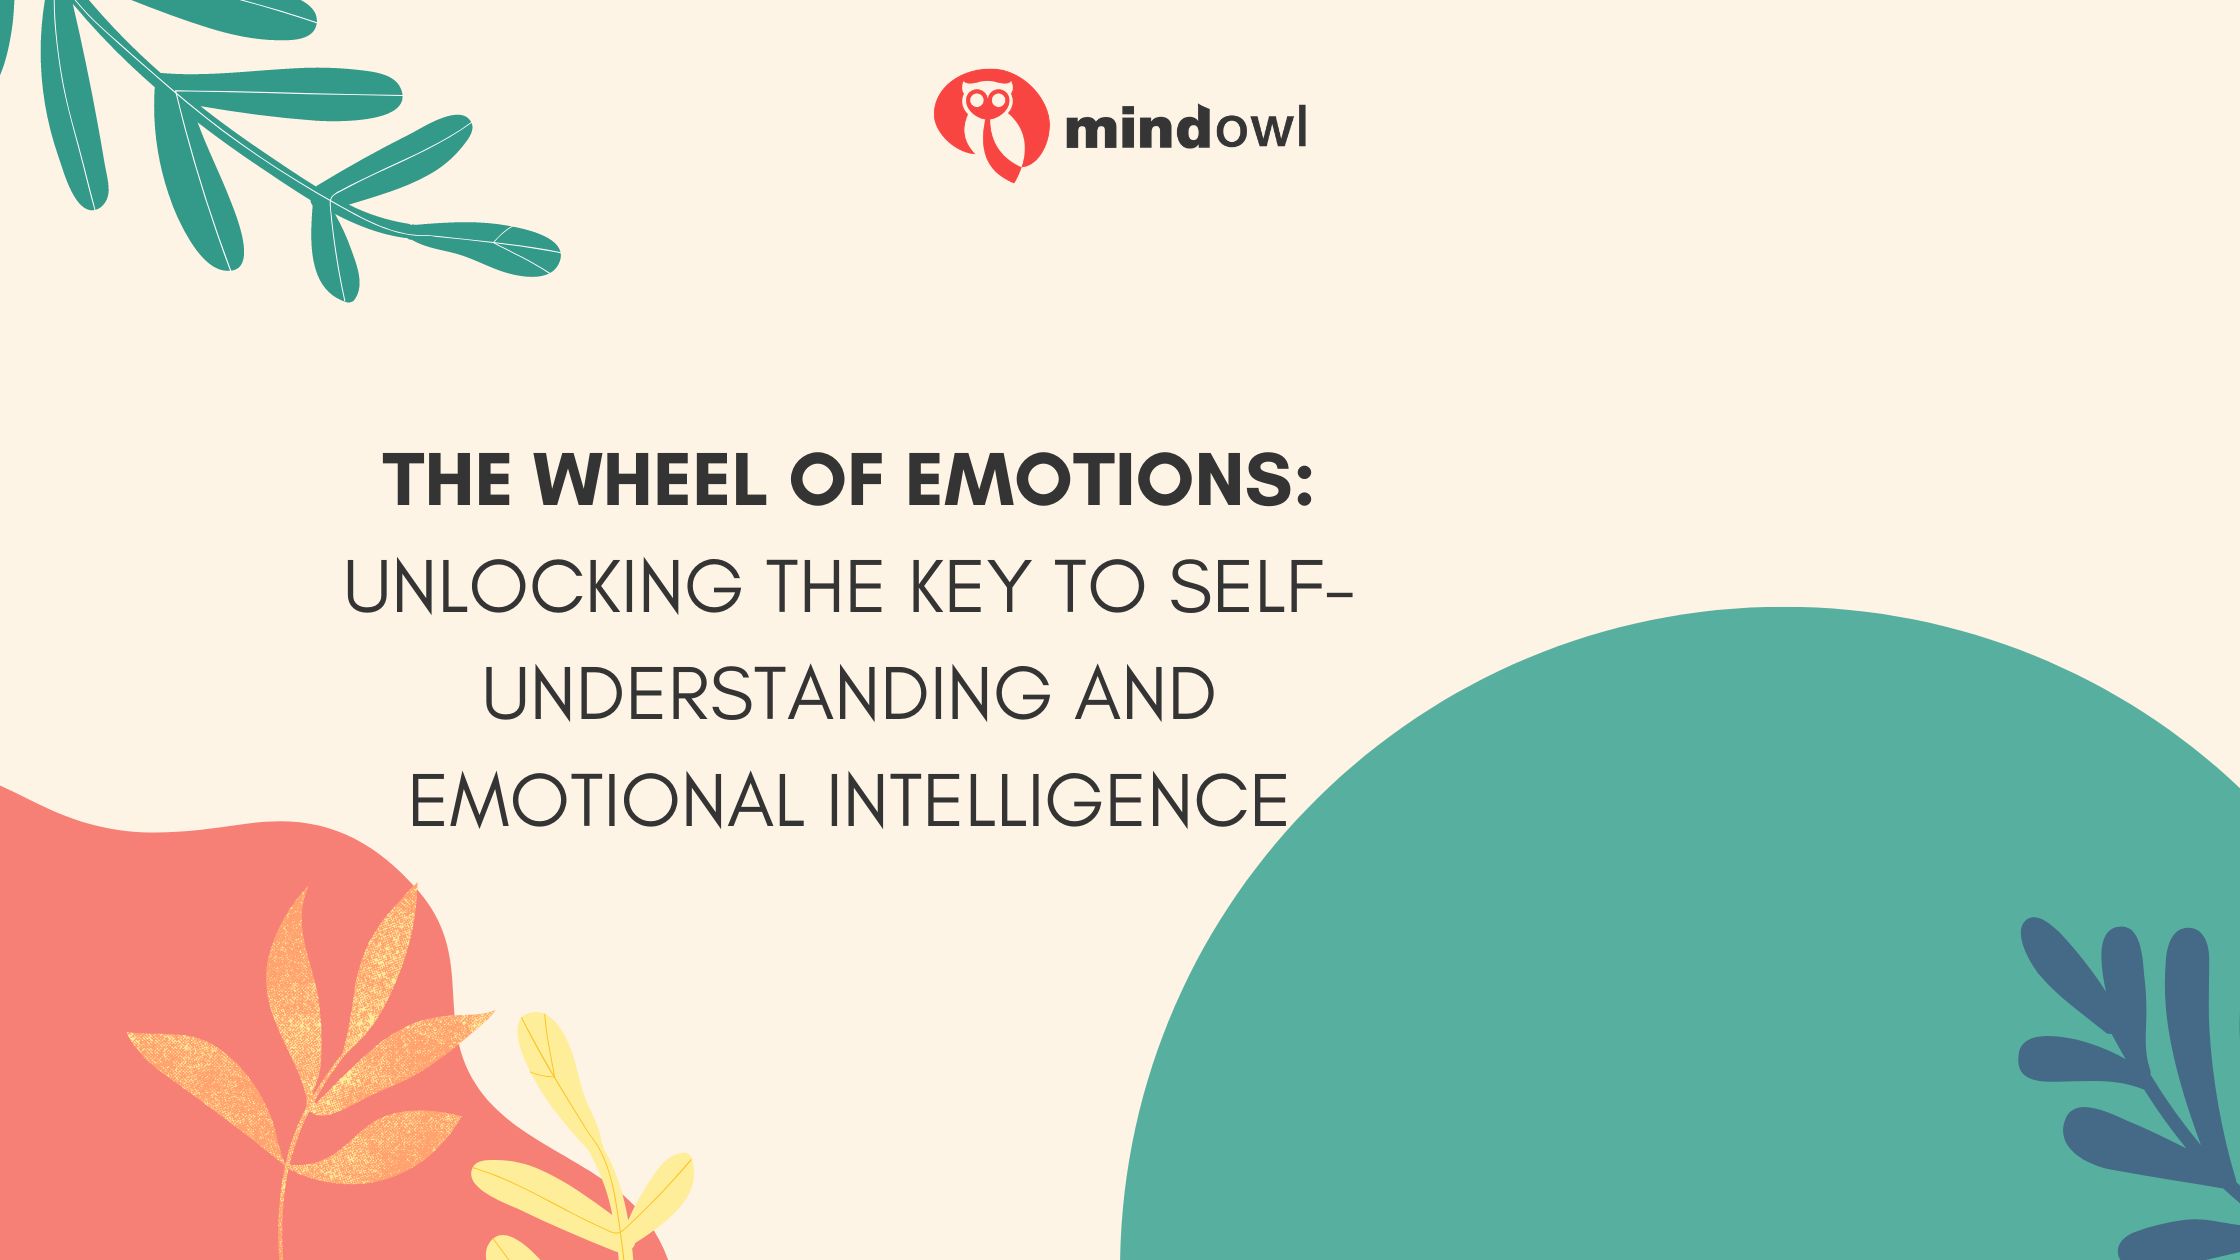 The Wheel of Emotions: Unlocking the Key to Self-Understanding and Emotional Intelligence